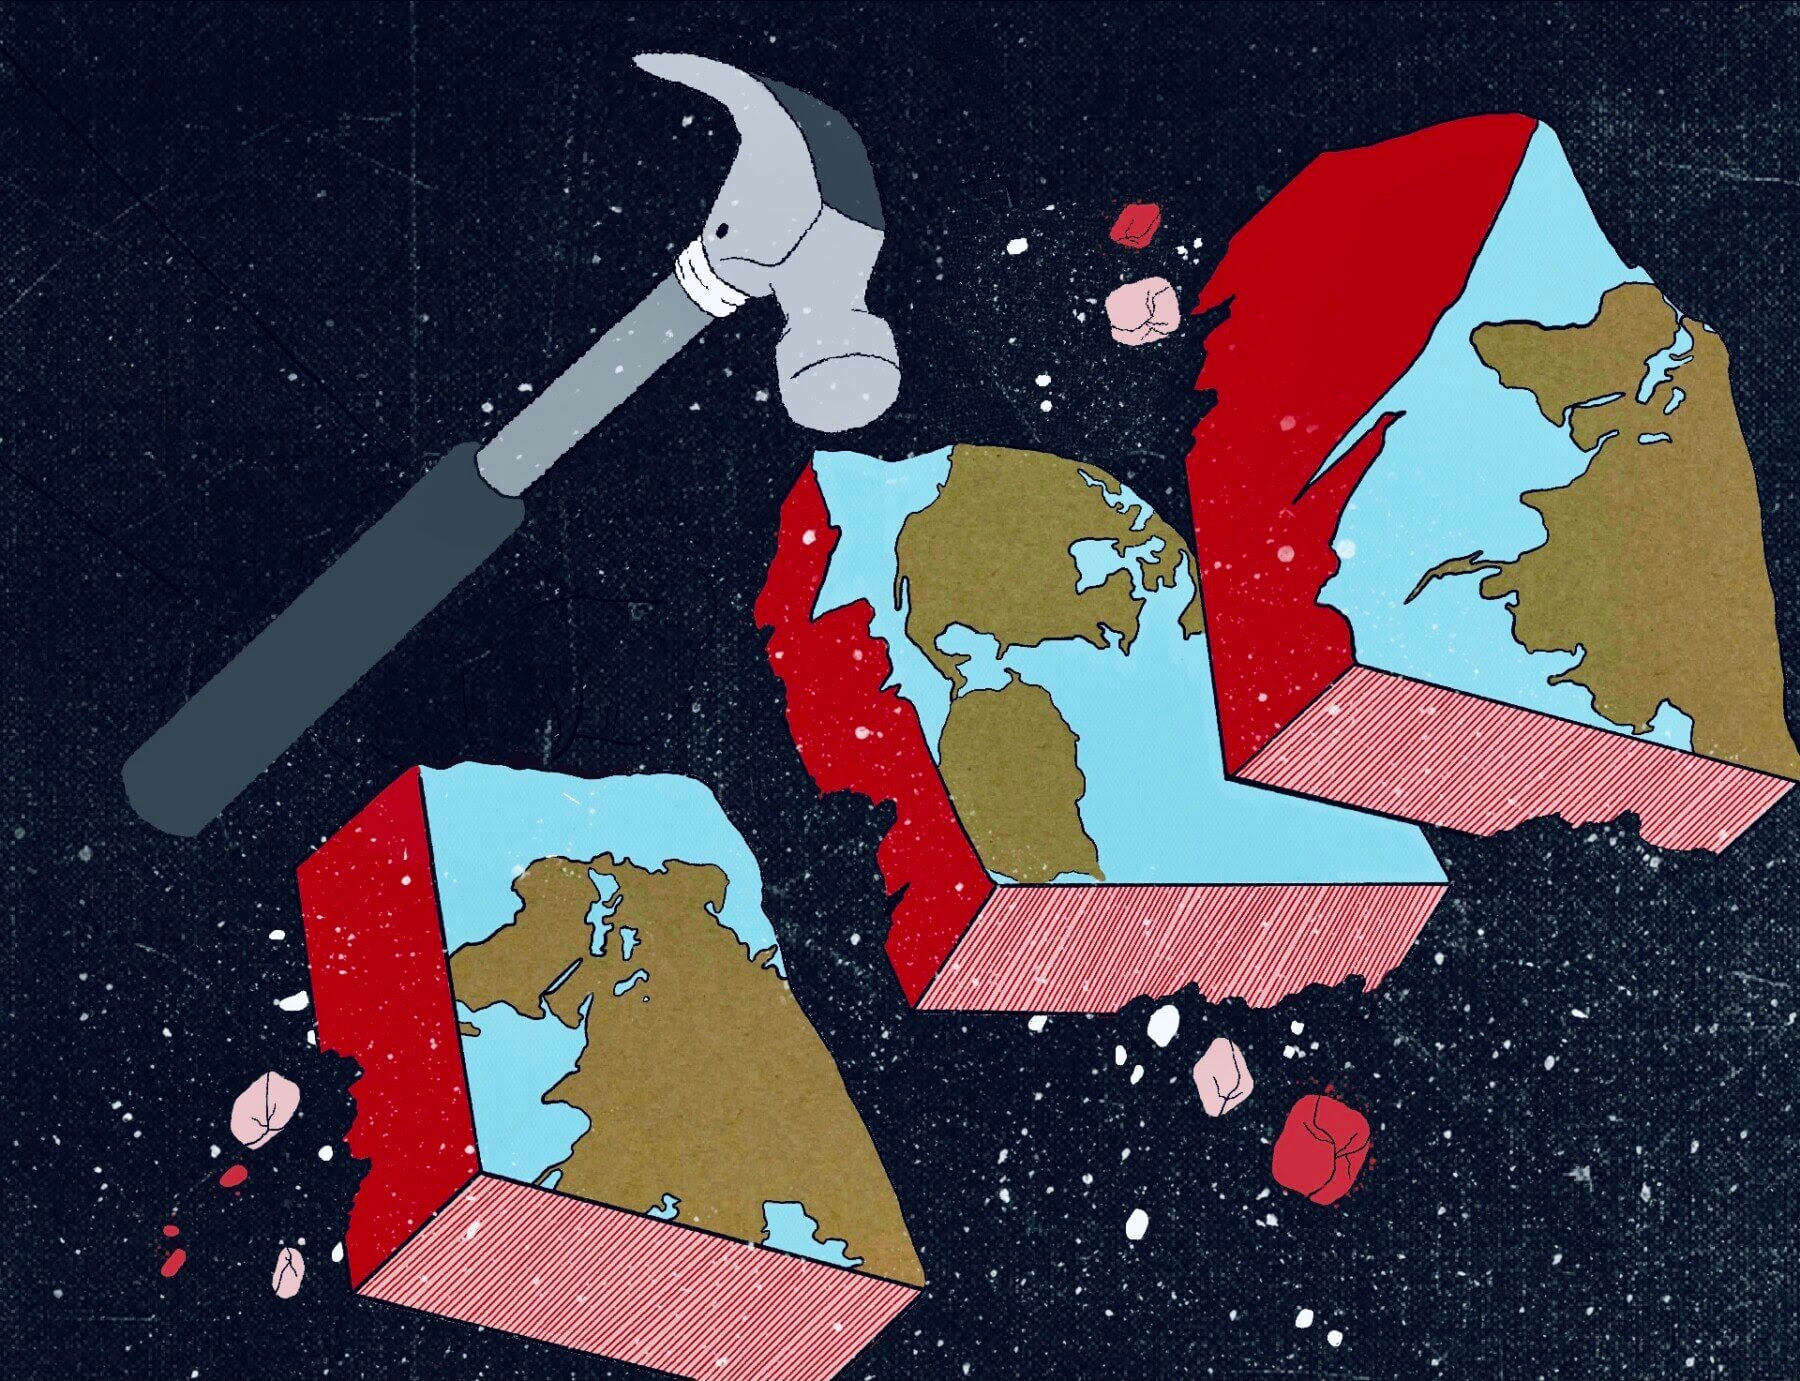 A hammer is shown breaking several chunks of the earth into smaller pieces. In the background, black space.